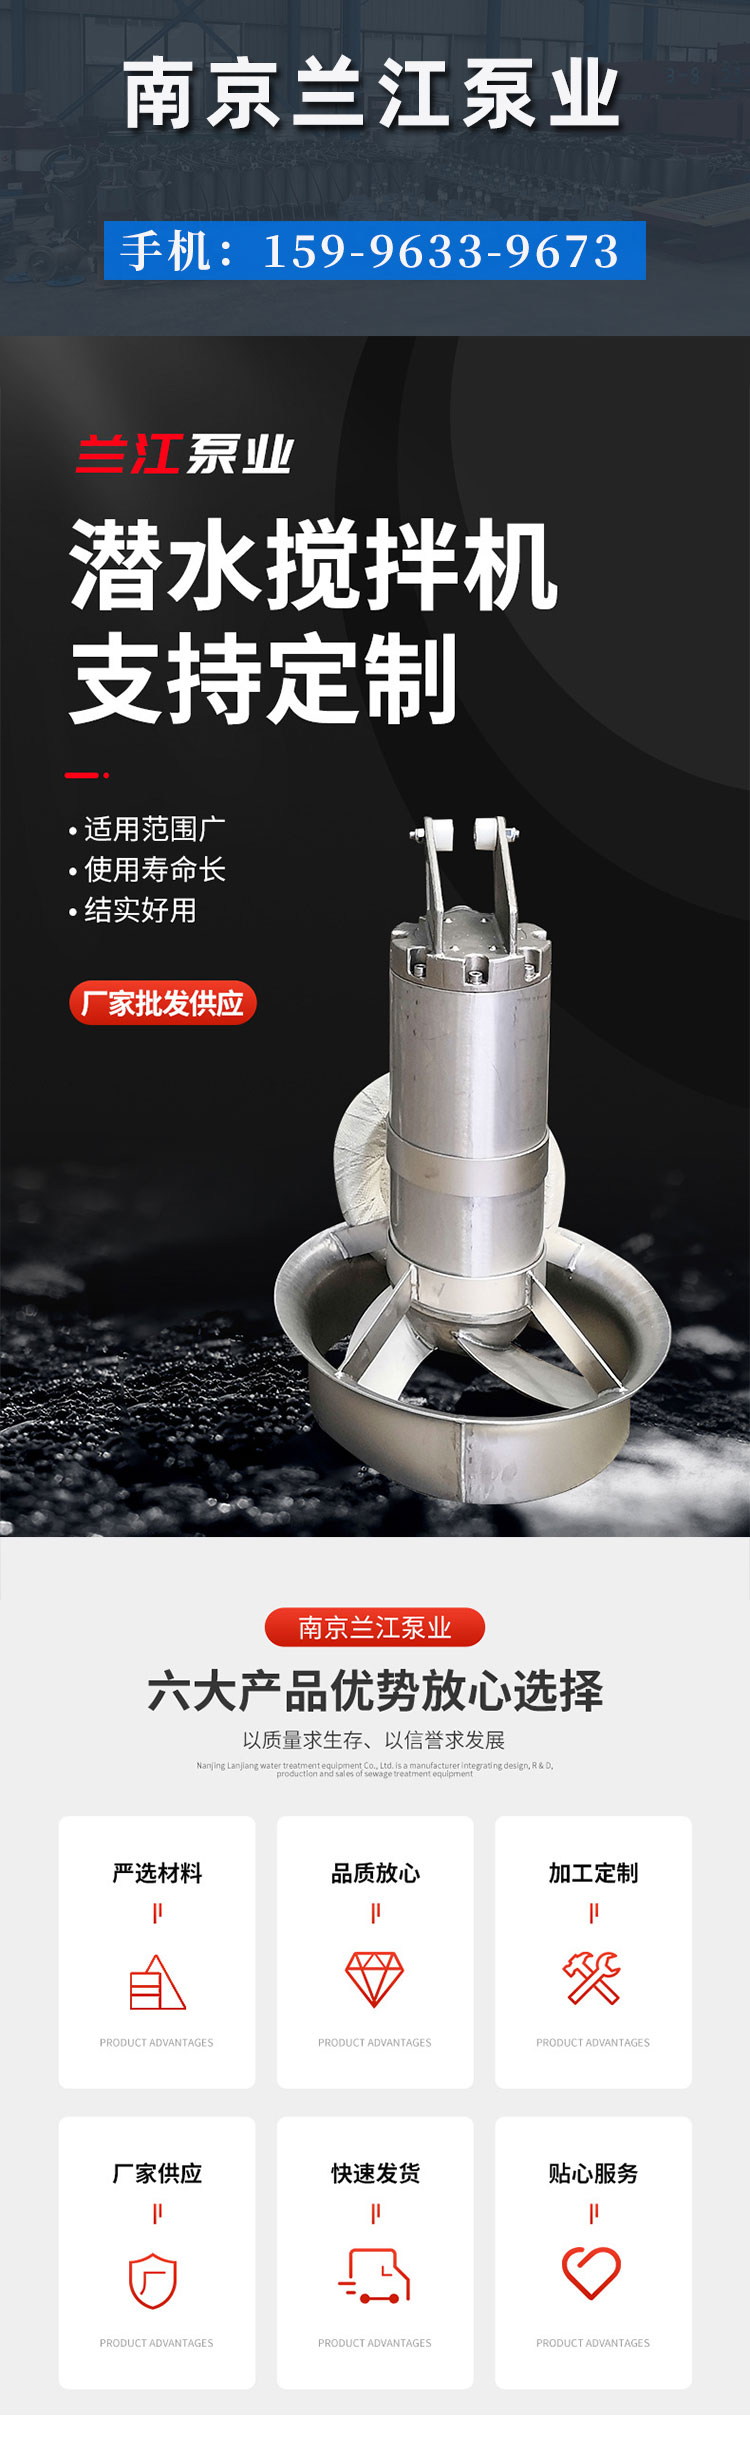 Stainless steel reaction kettle QJB submersible mixer with stable performance and complete styles Lanjiang Pump Industry